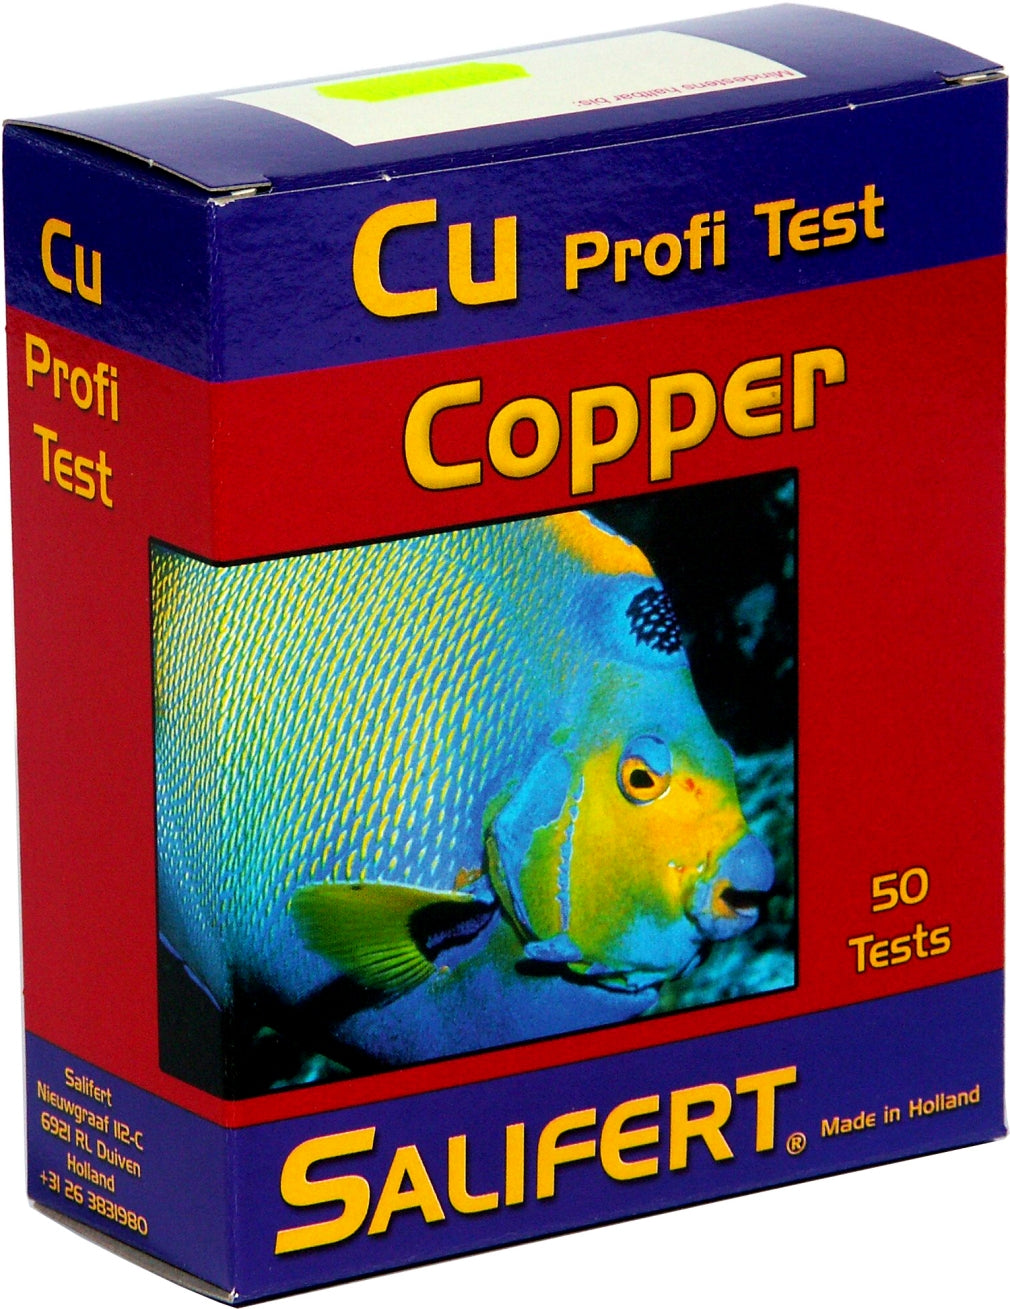 Salifert Copper Cu Profi Test (50 tests) available at Coral Passion in Essex